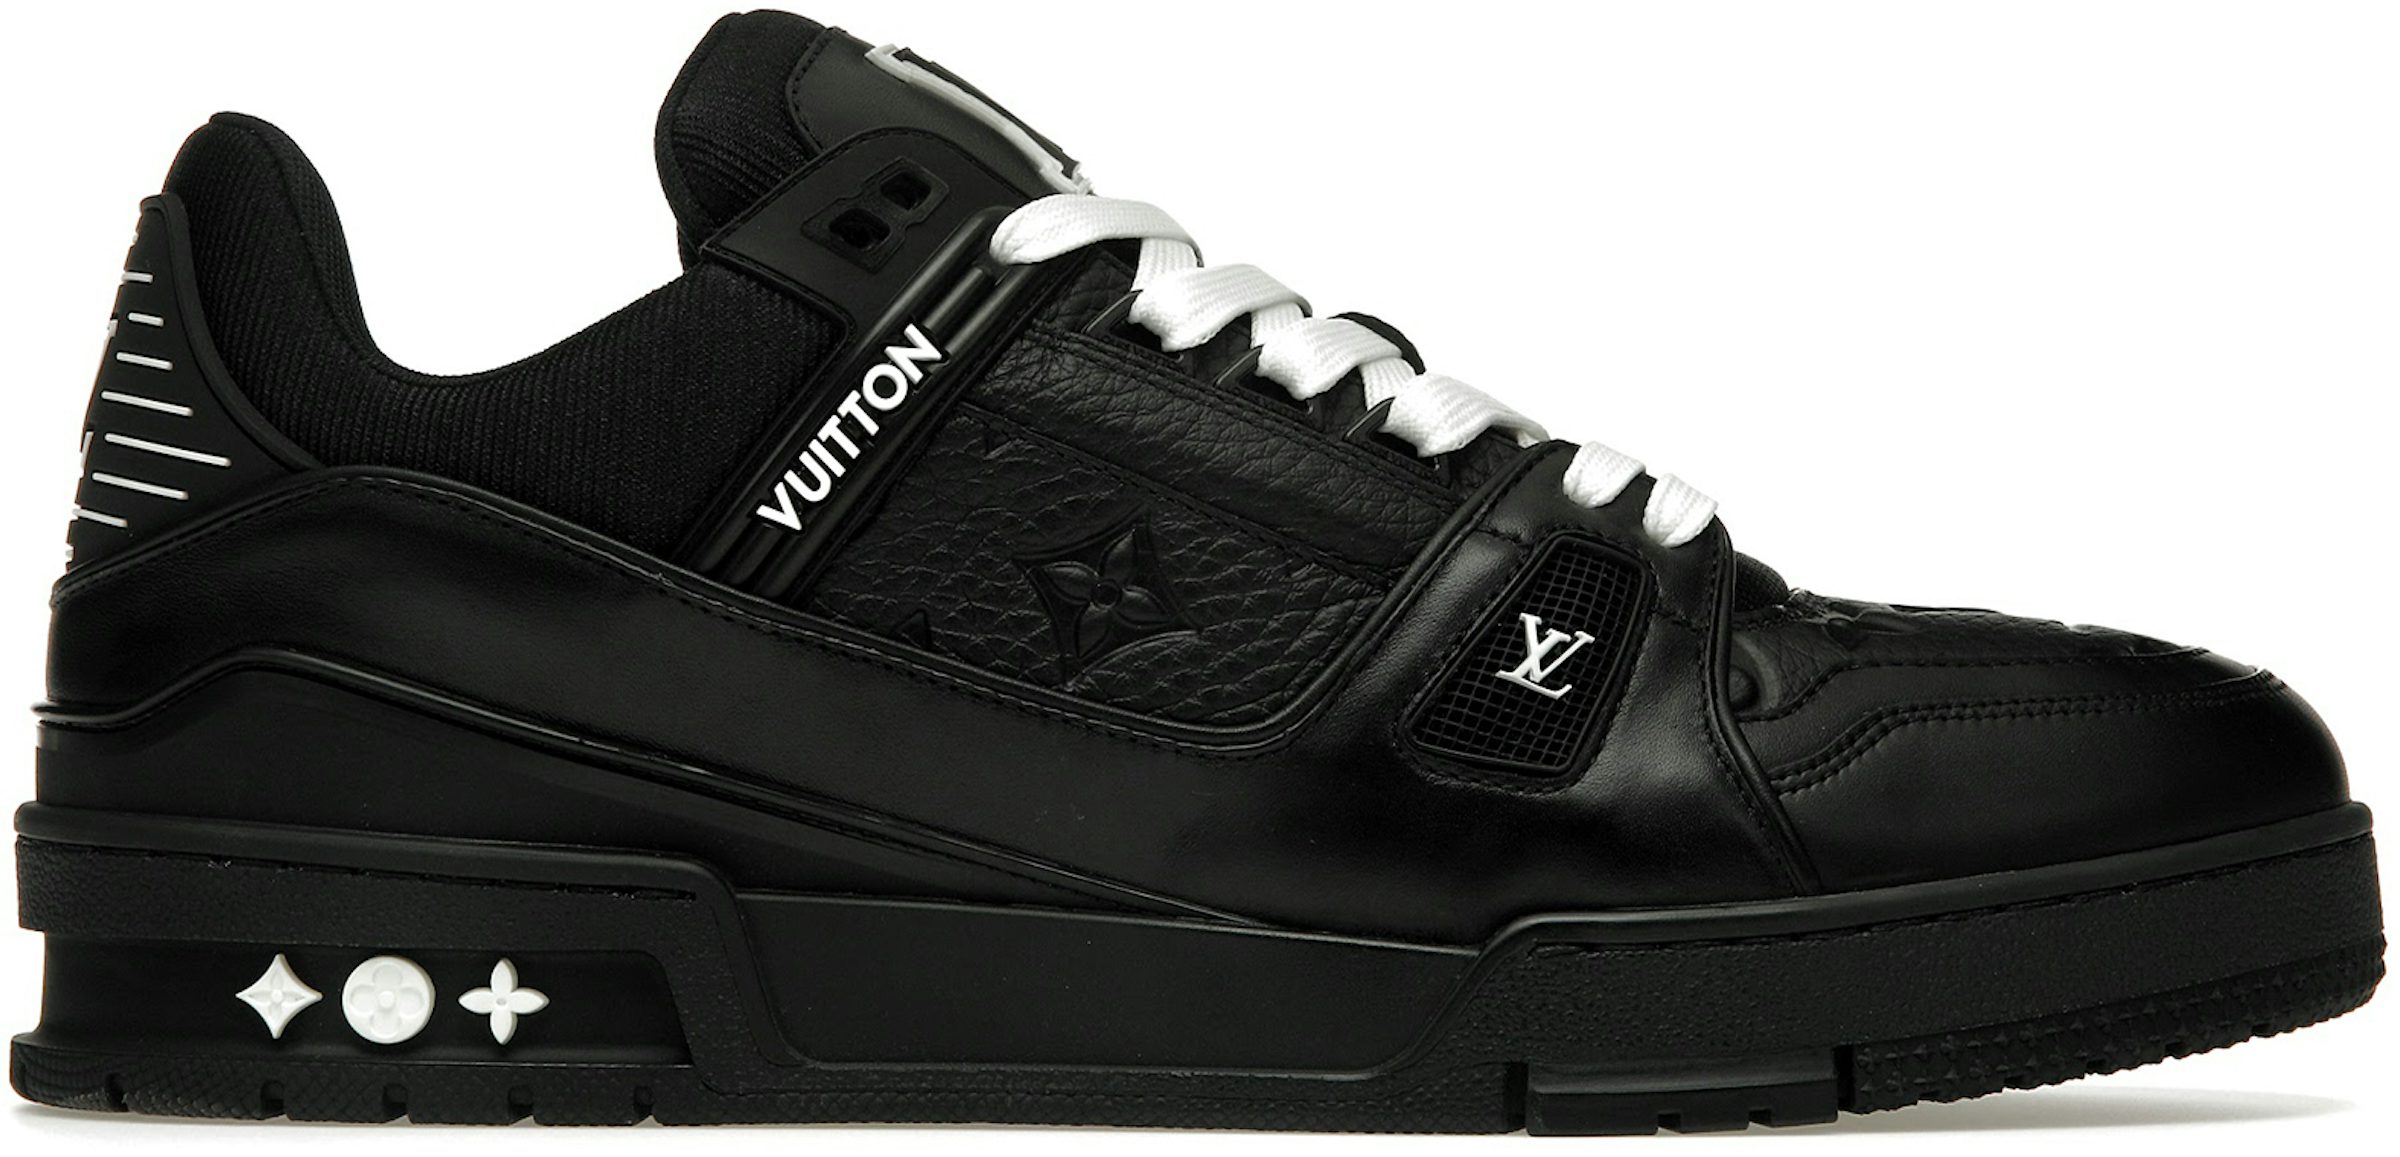 Buy Louis Vuitton Size 12 Shoes & New Sneakers - StockX